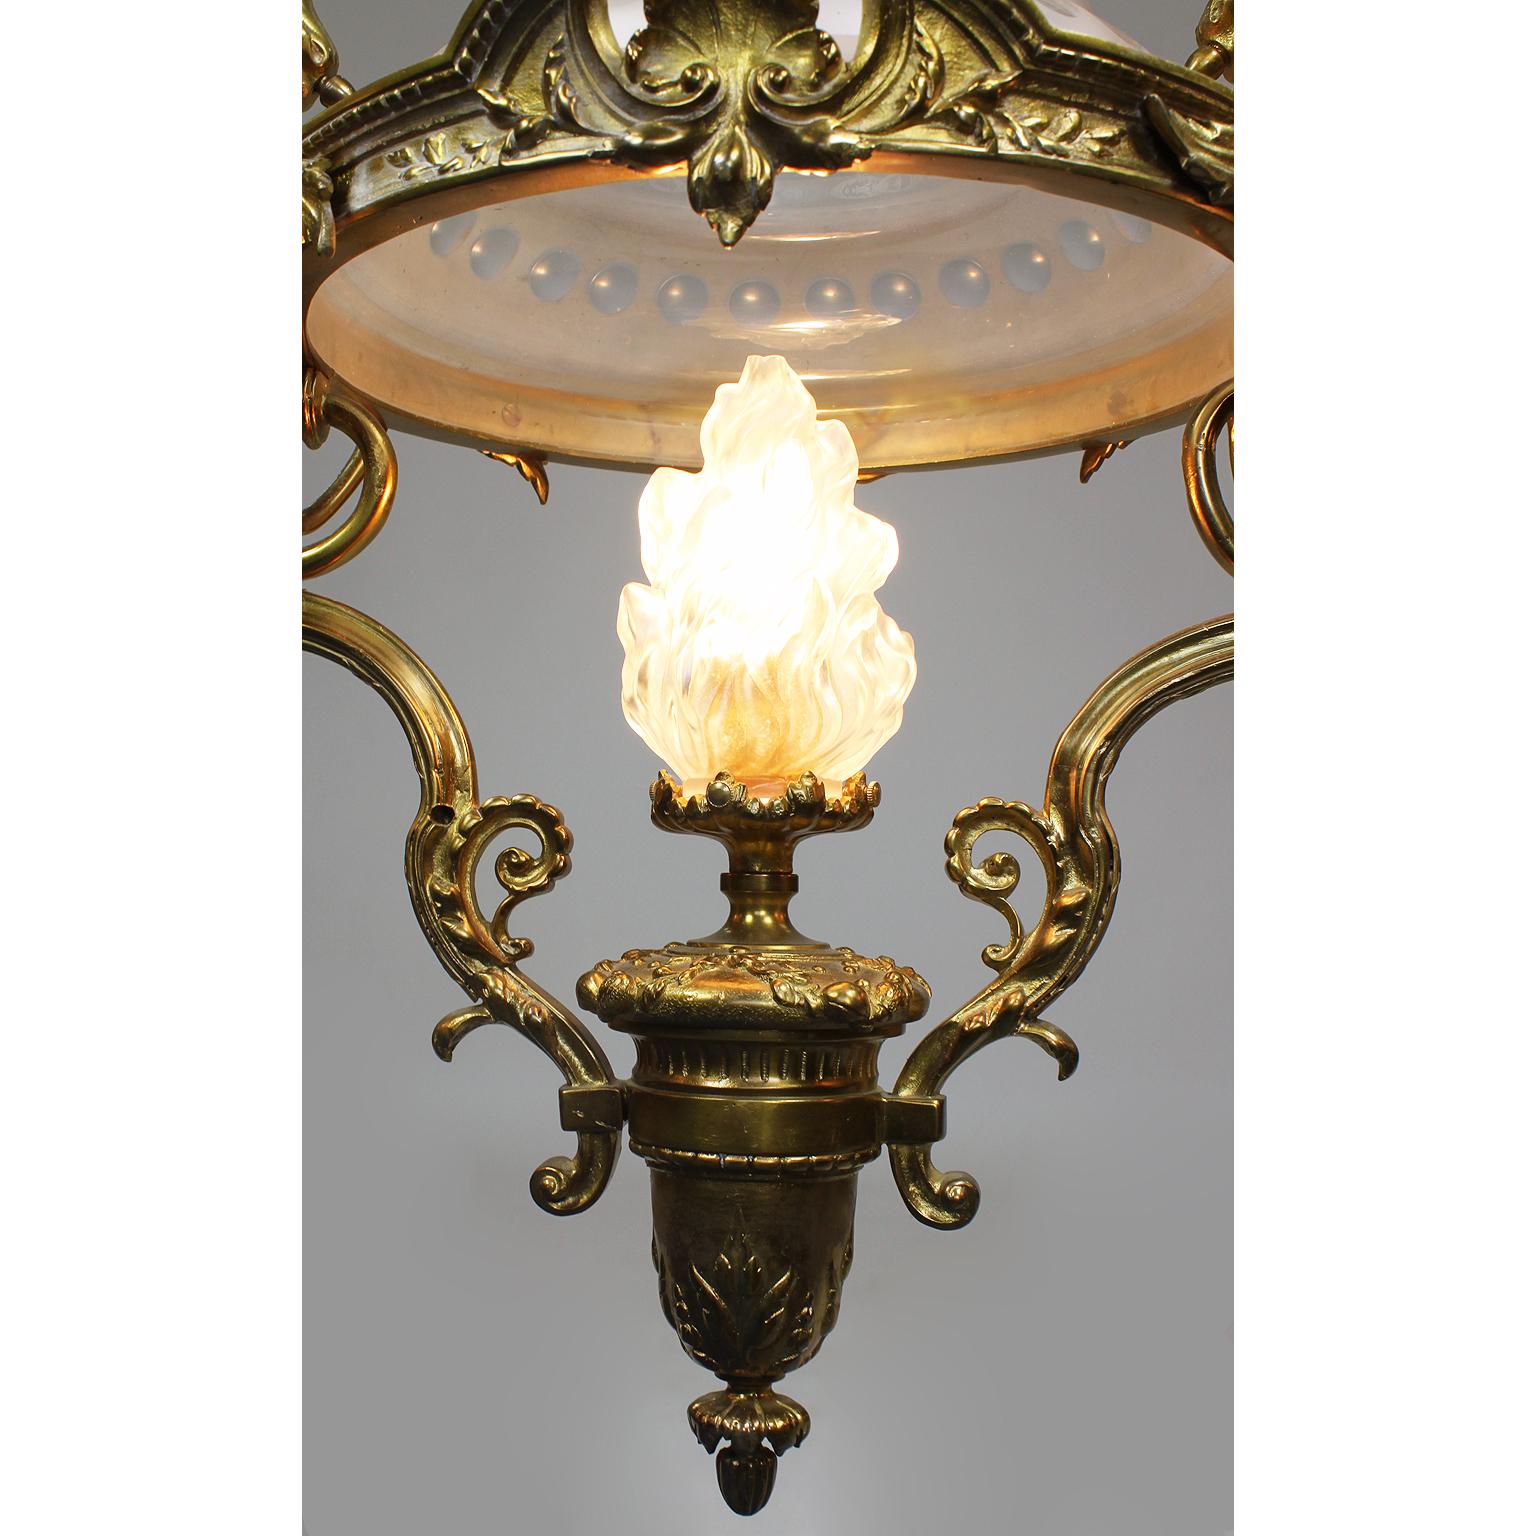 Molded Fine French Belle Époque early 20th Century Neoclassical Style Dragon Chandelier For Sale